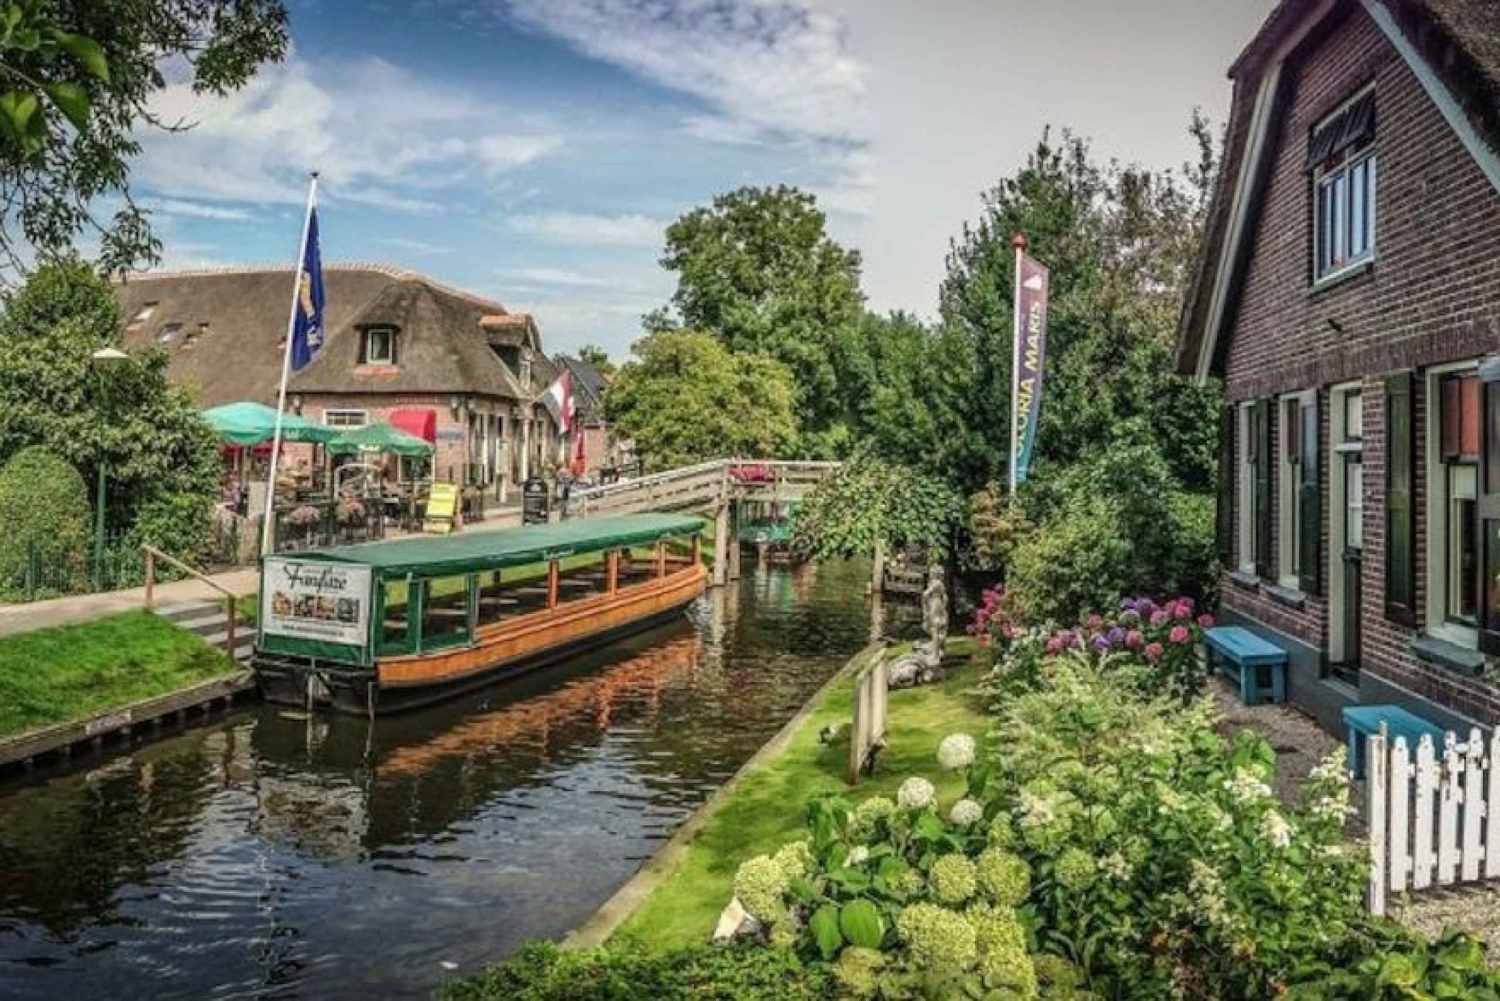 From Amsterdam: Private Tour to Giethoorn with Canal Cruise